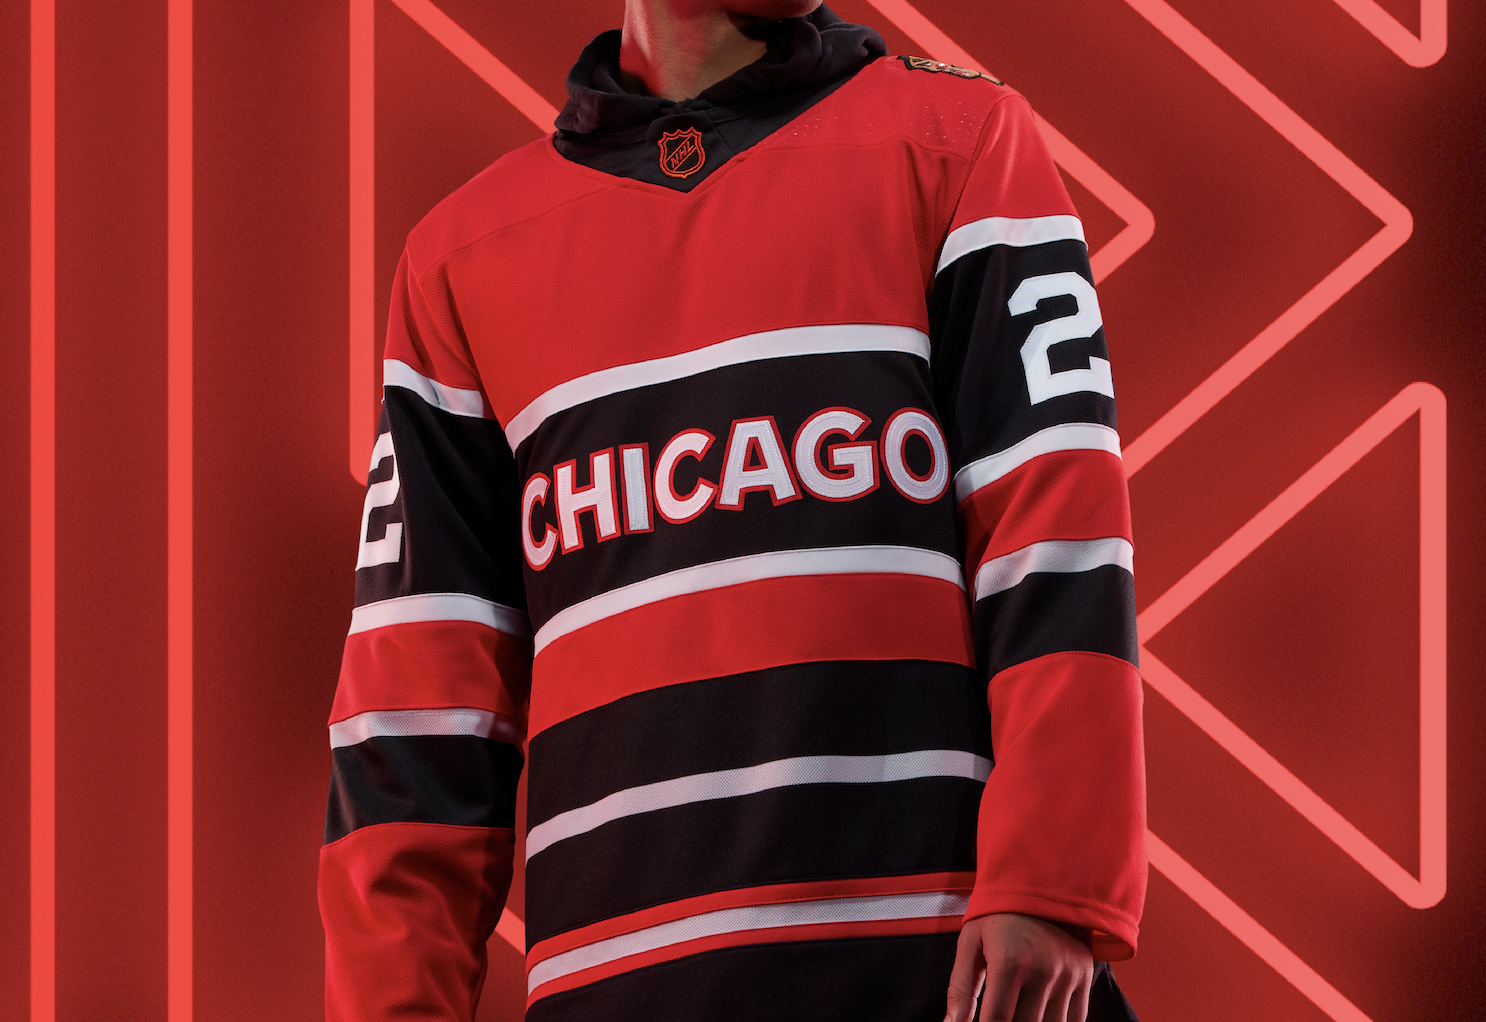 True to the franchise’s long history, Chicago’s jersey is inspired by one of the oldest legacy uniforms in this year’s group: their 1938 “barbershop pole” jersey. This one really embodies the concept of “Reverse Retro,” as we reversed the Black and Red color positions from the classic edition.